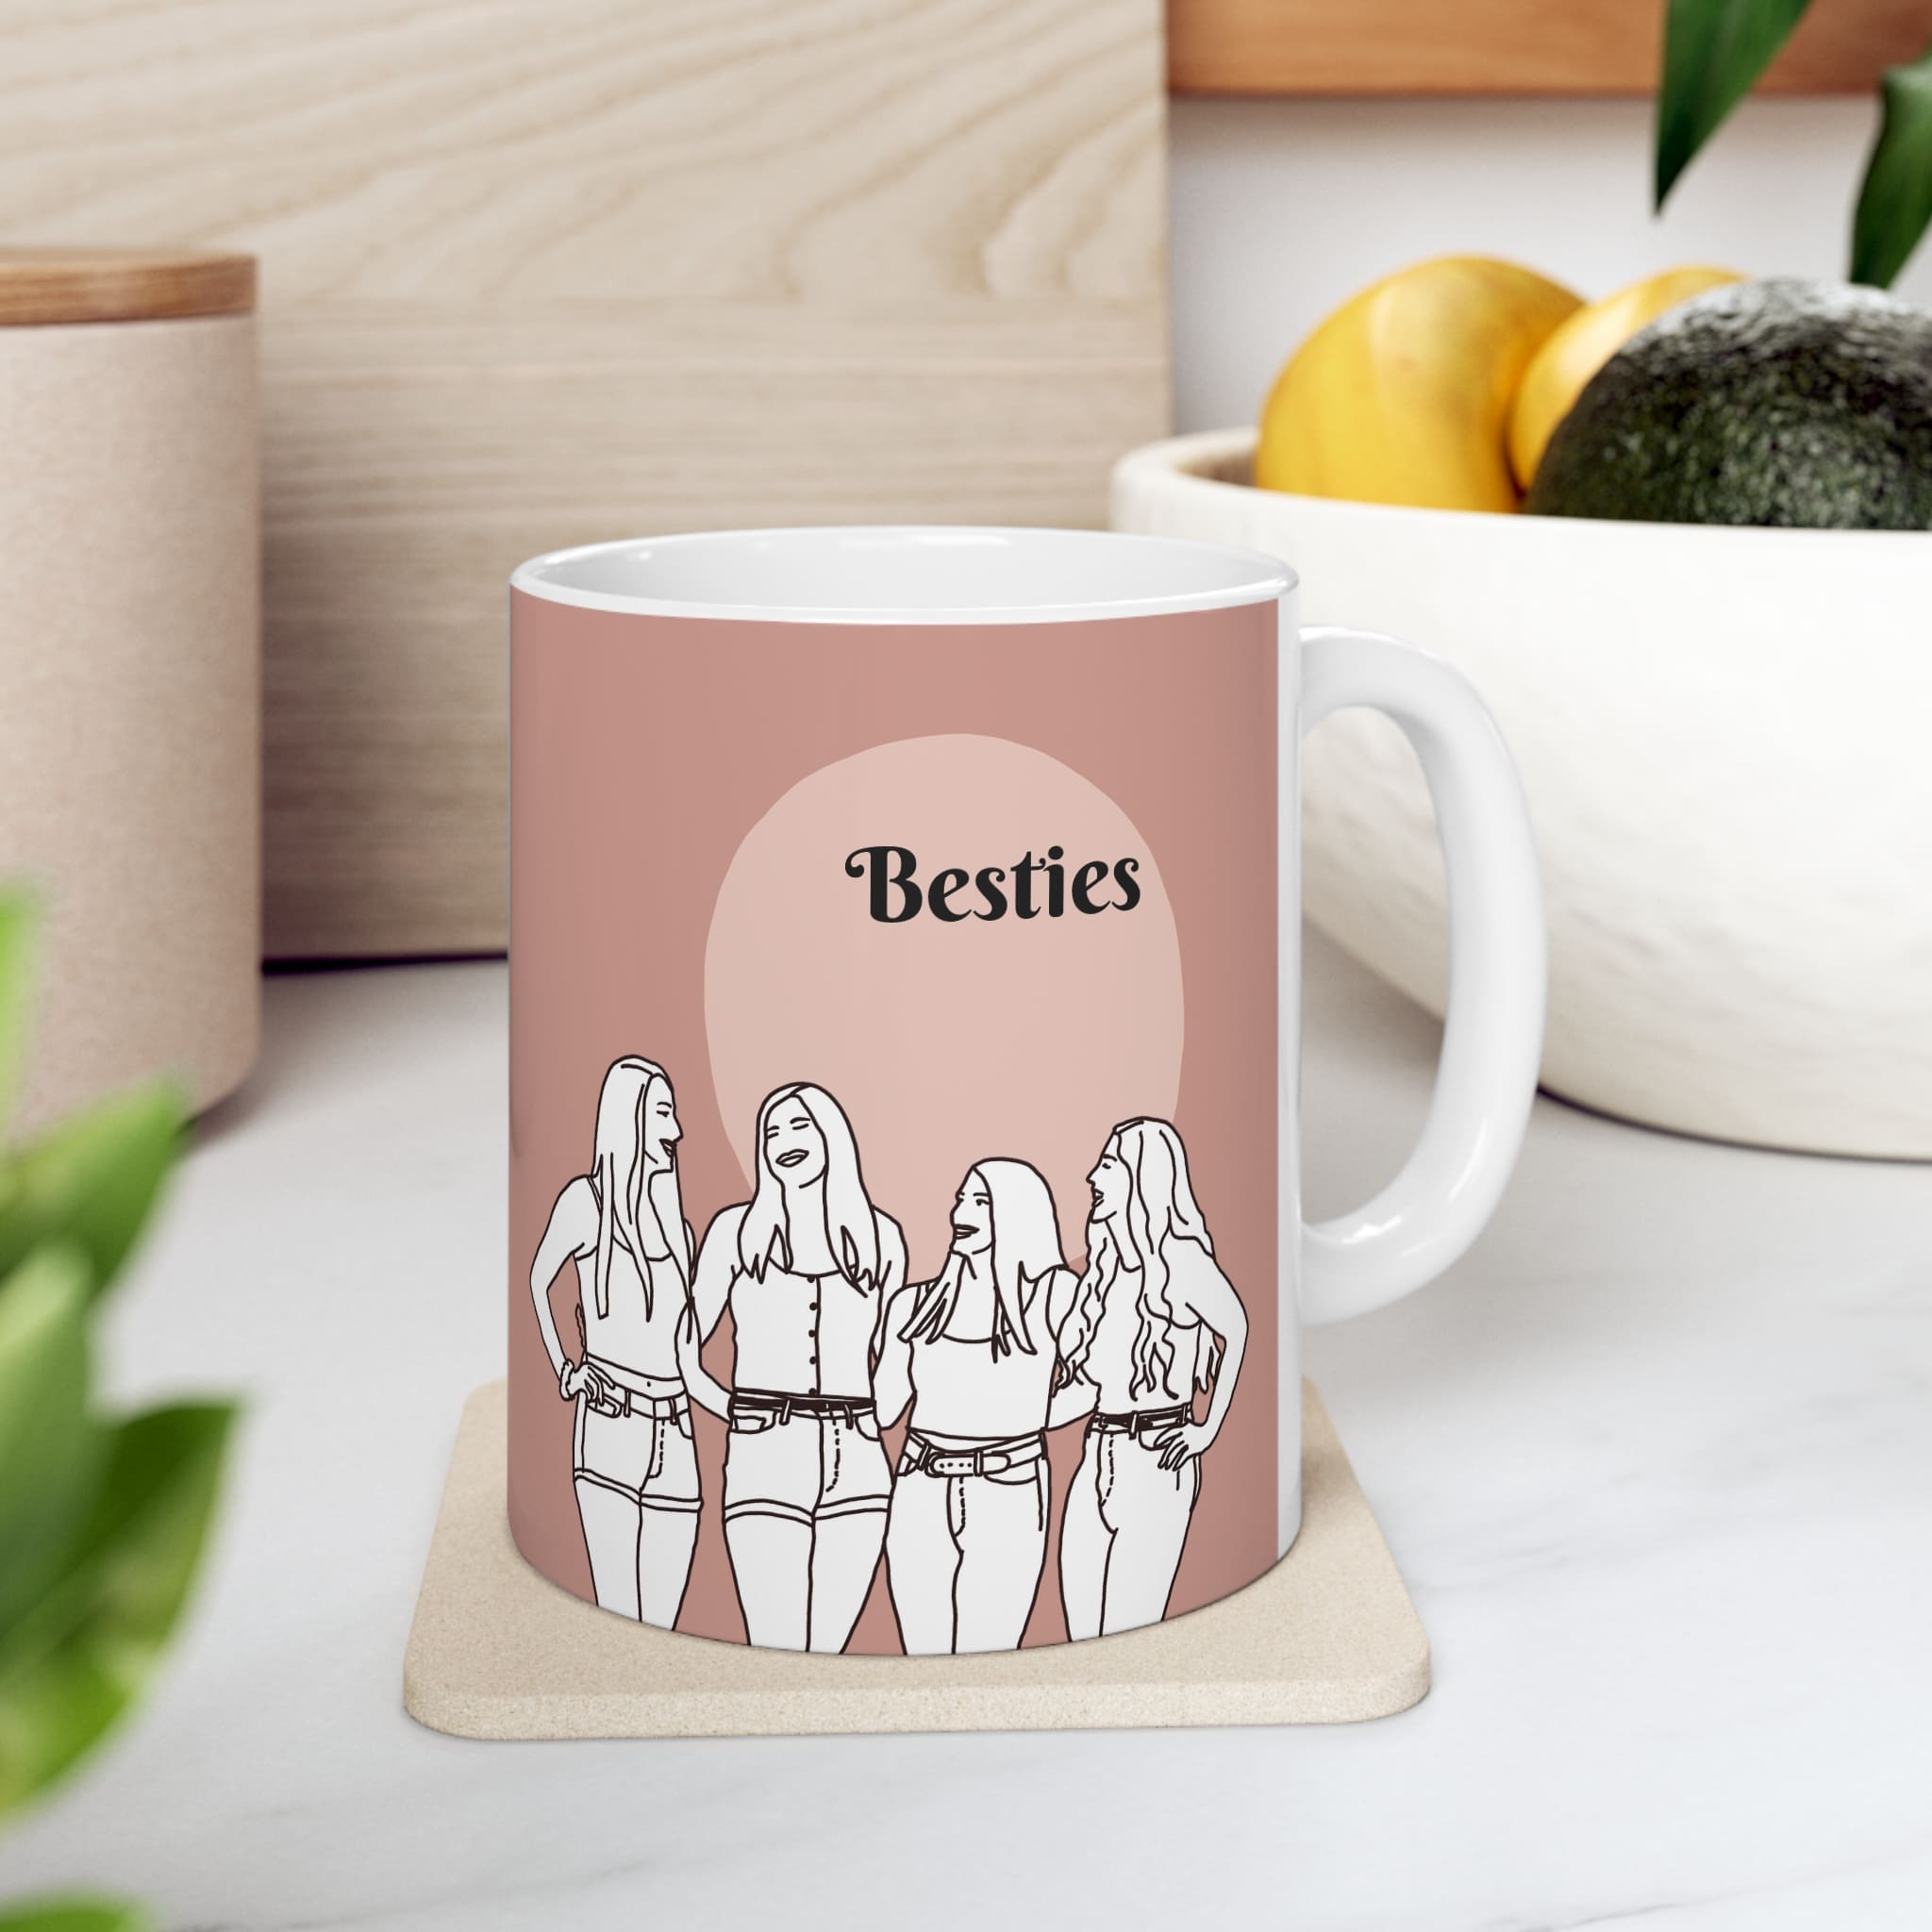 besties matching team mugs with their names and custom quote on colorful color blocking back ground fashion style and line portrait illustration from photo